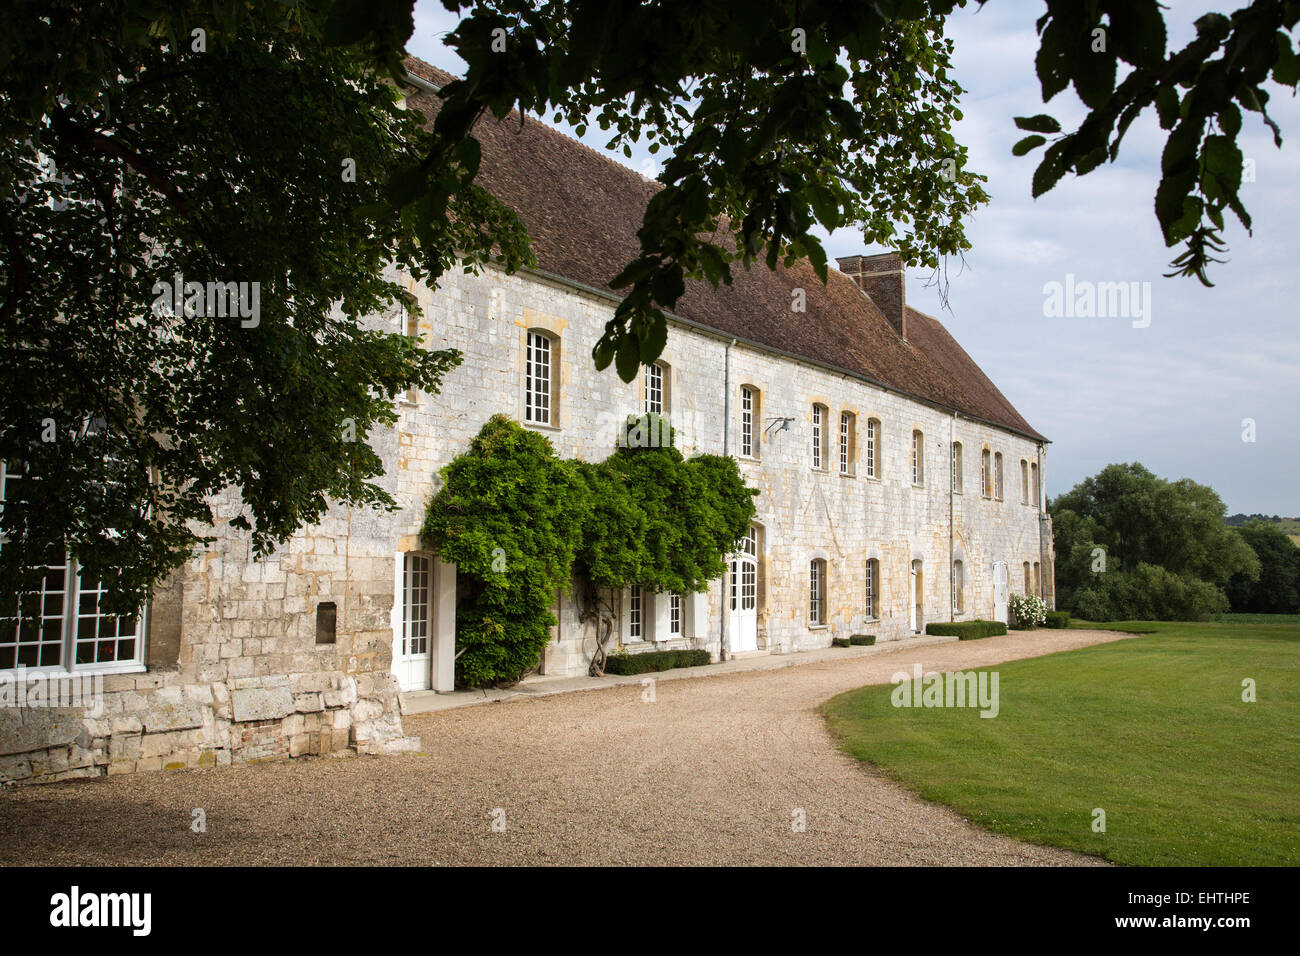 ILLUSTRATION OF THE EURE, UPPER NORMANDY, FRANCE Stock Photo